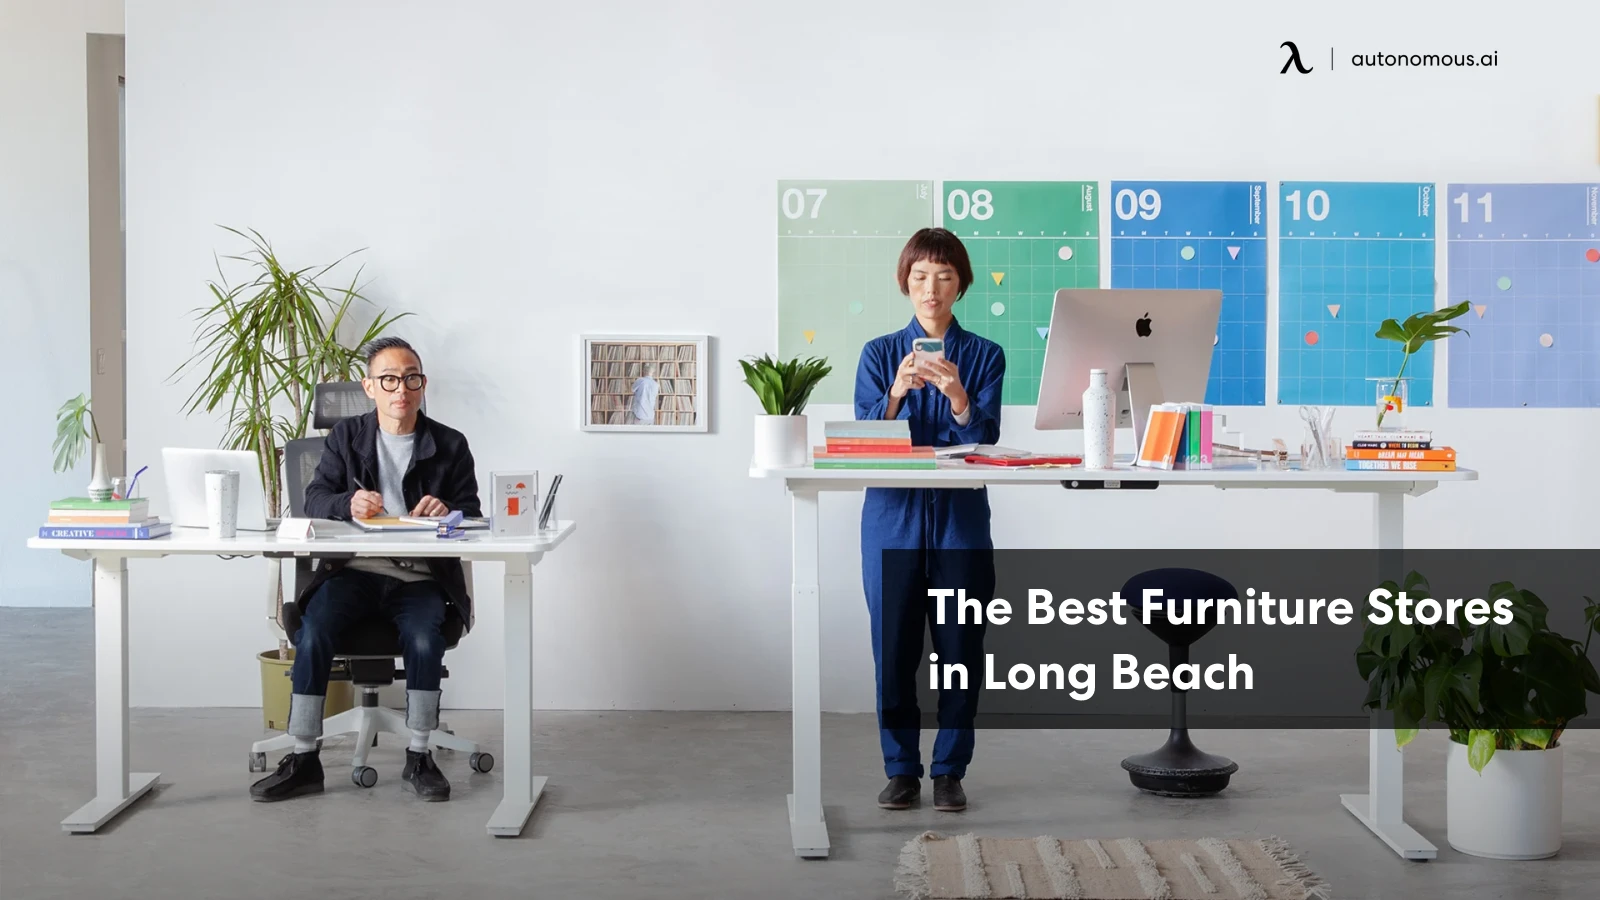 Long Beach Furniture Store: Top Picks and Buying Guide